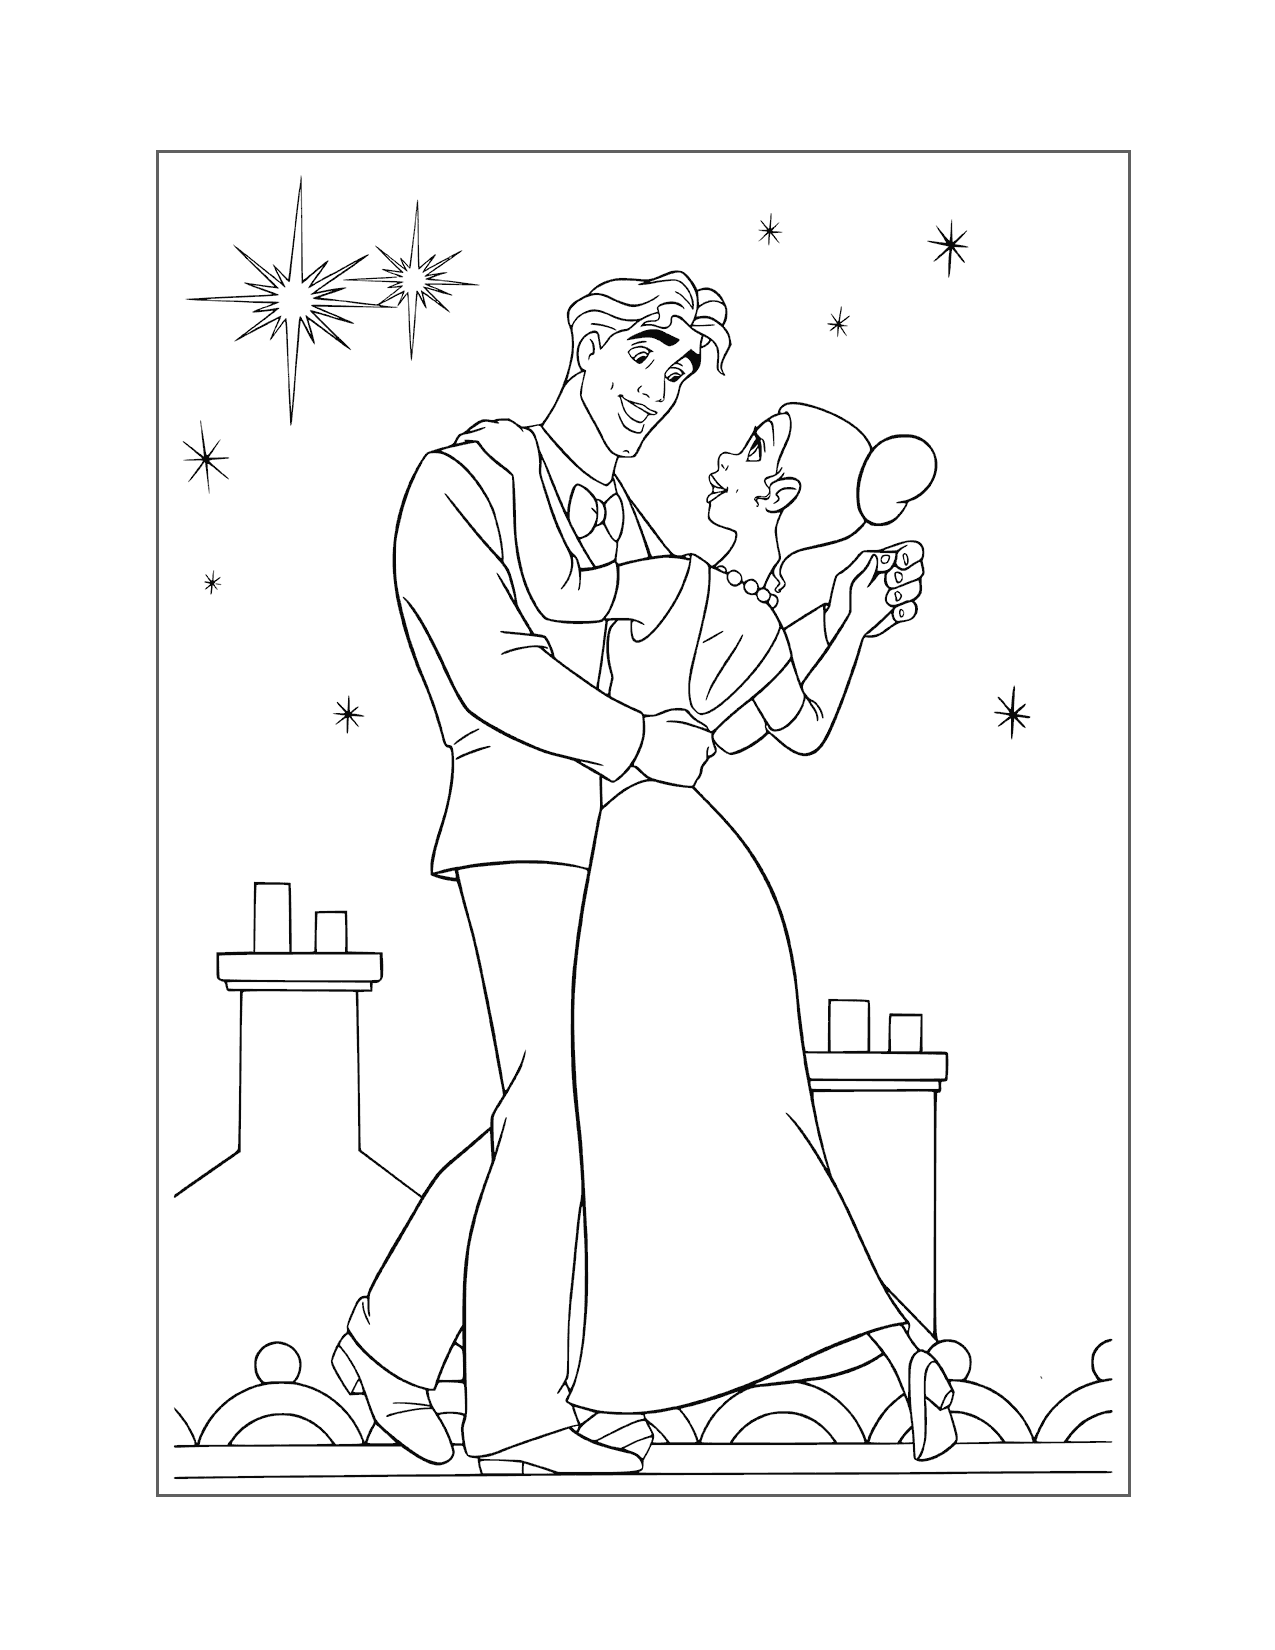 Naveen And Tiana Dance As Humans Coloring Page